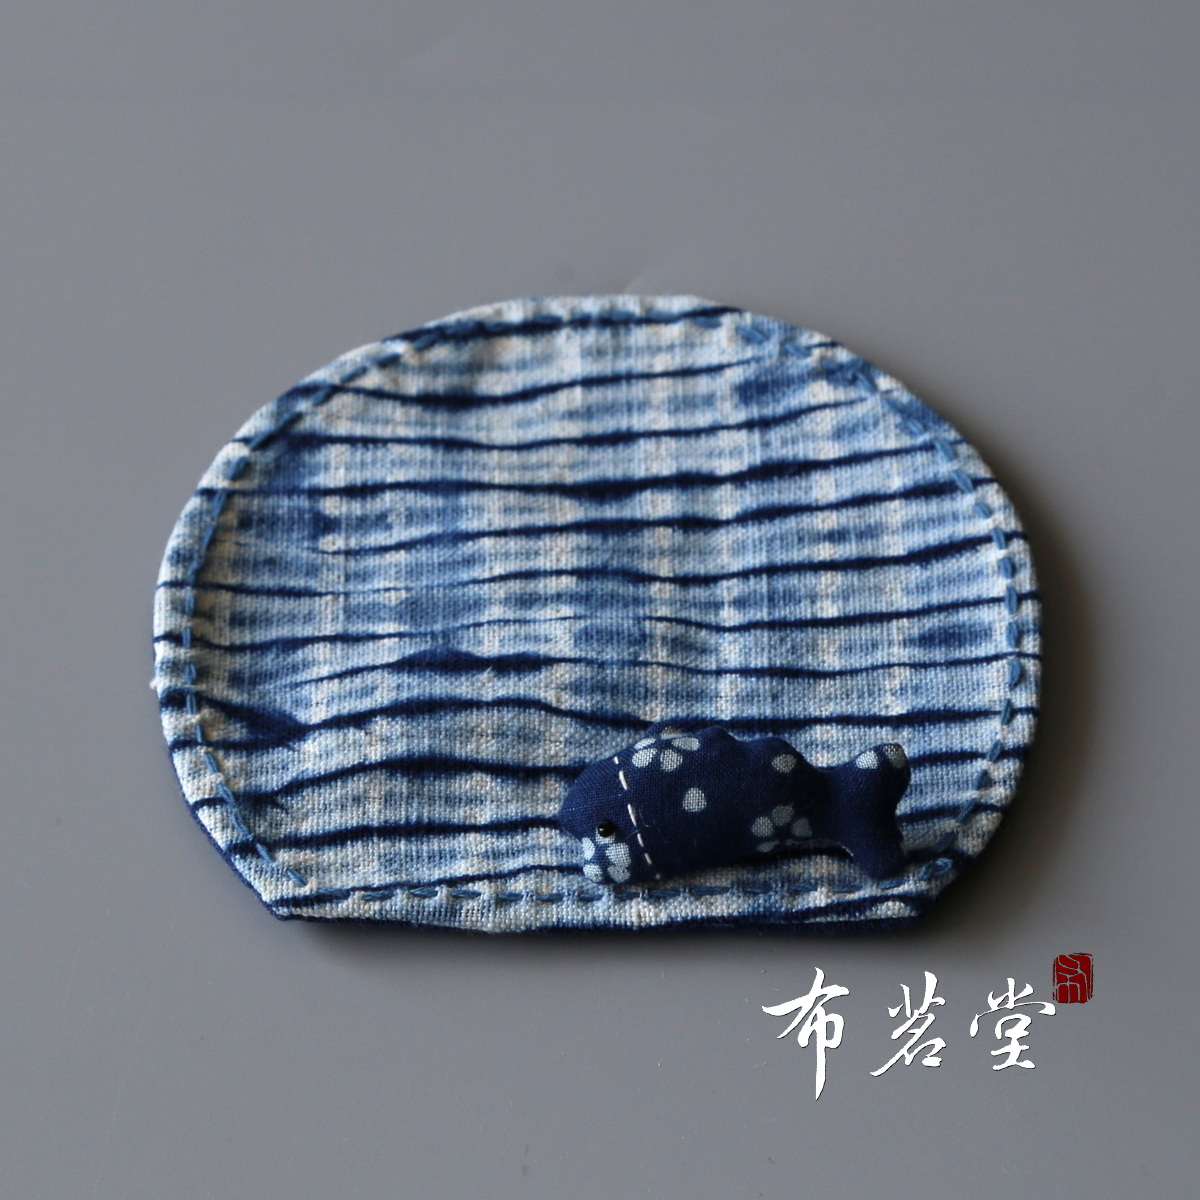 Blue Dyed 3D Animal Fabric Coaster Cartoon Cute Pet Handmade Tie-Dyed Embroidery Pure Cotton Cup Mat